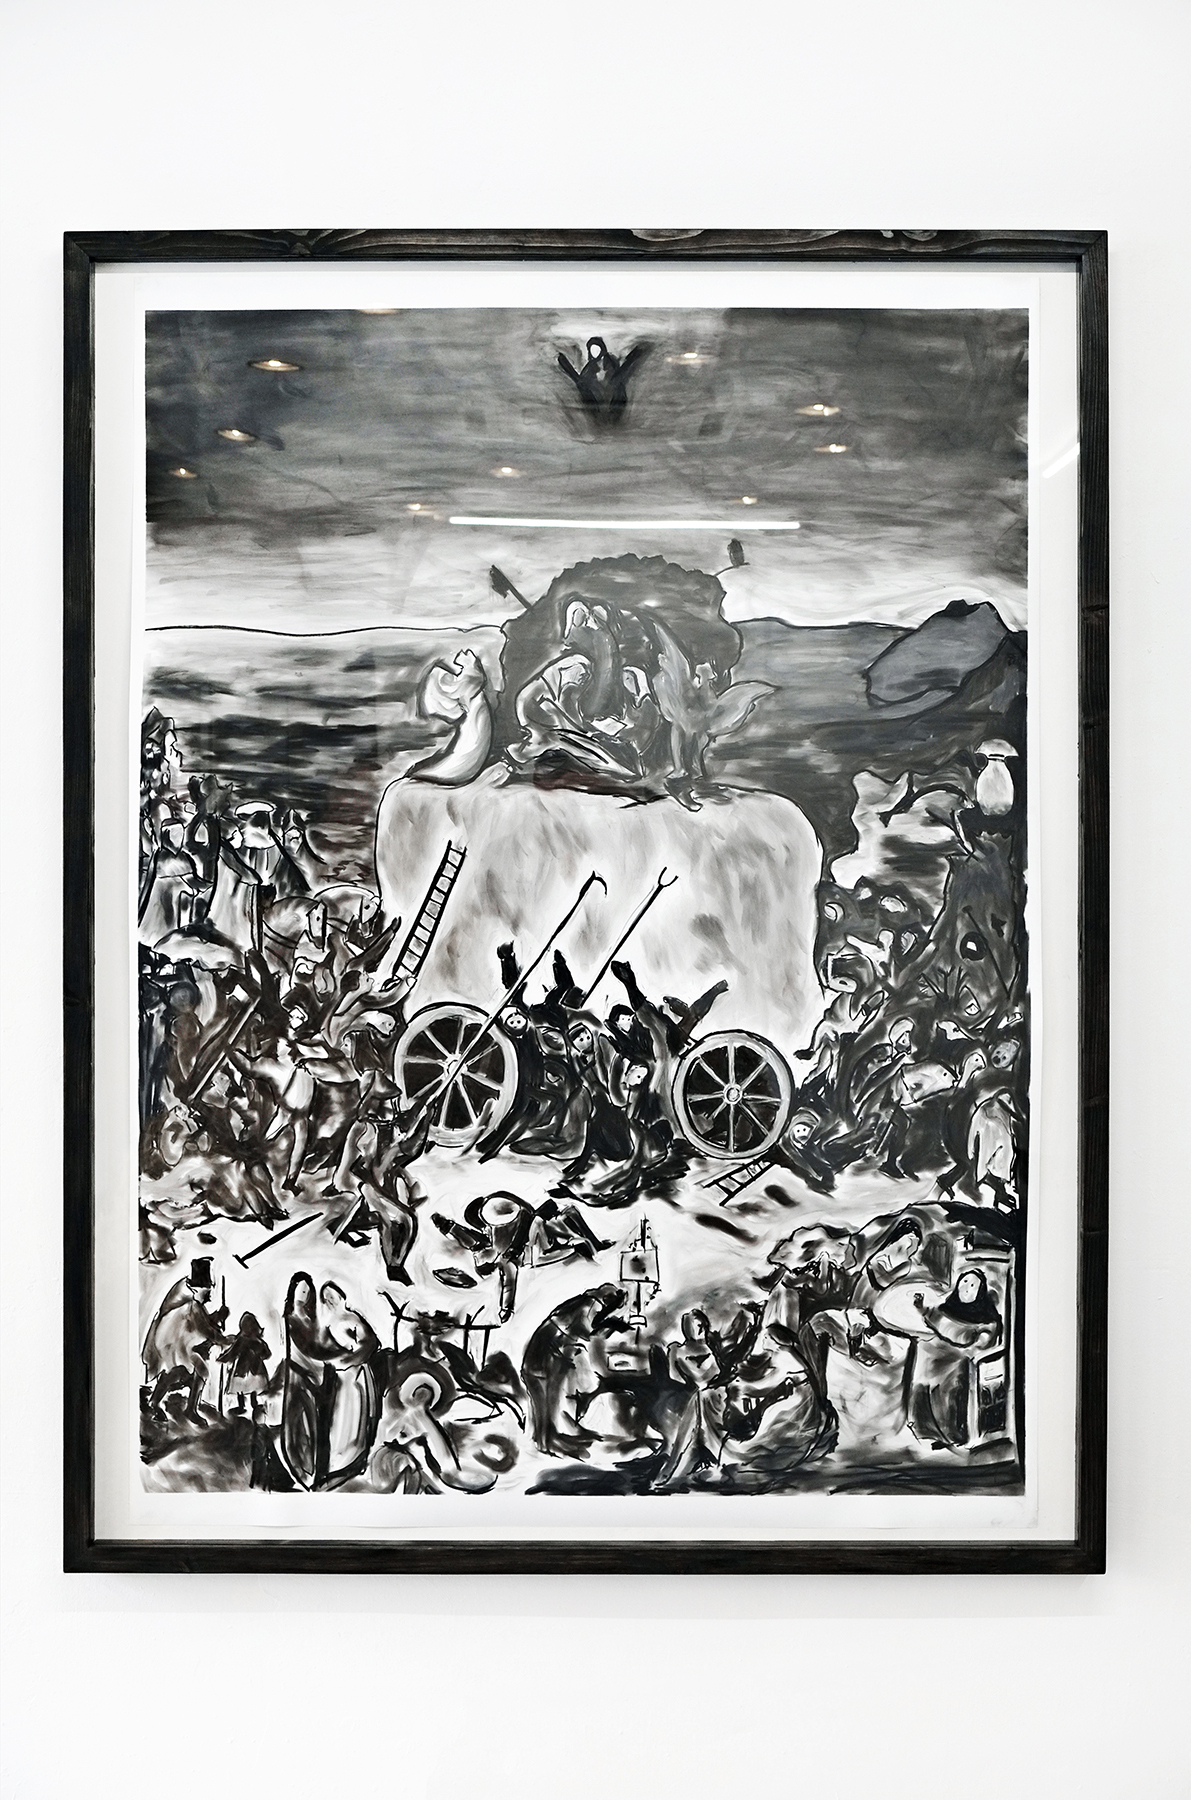 Conrad Hübbe, "The Haywain" (after Hieronymus Bosch), 2020, charcoal on paper and artist frame, 135 x 100 cm